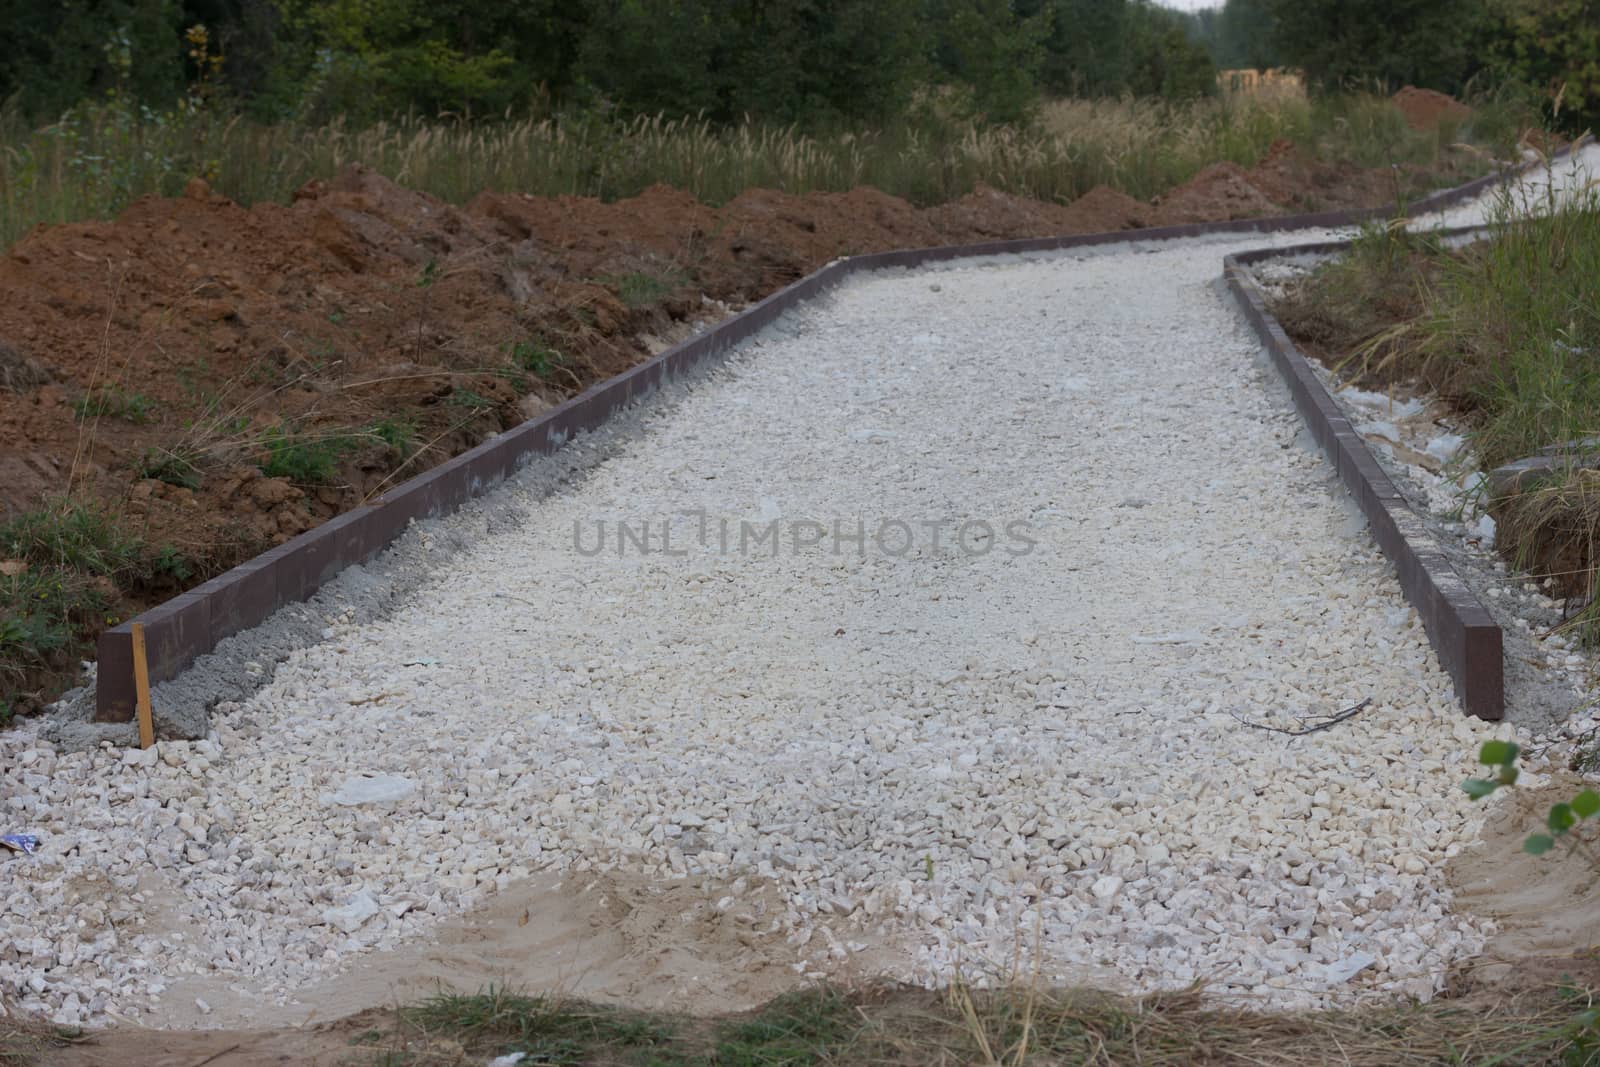 incomplete road with white gravel  in the forest